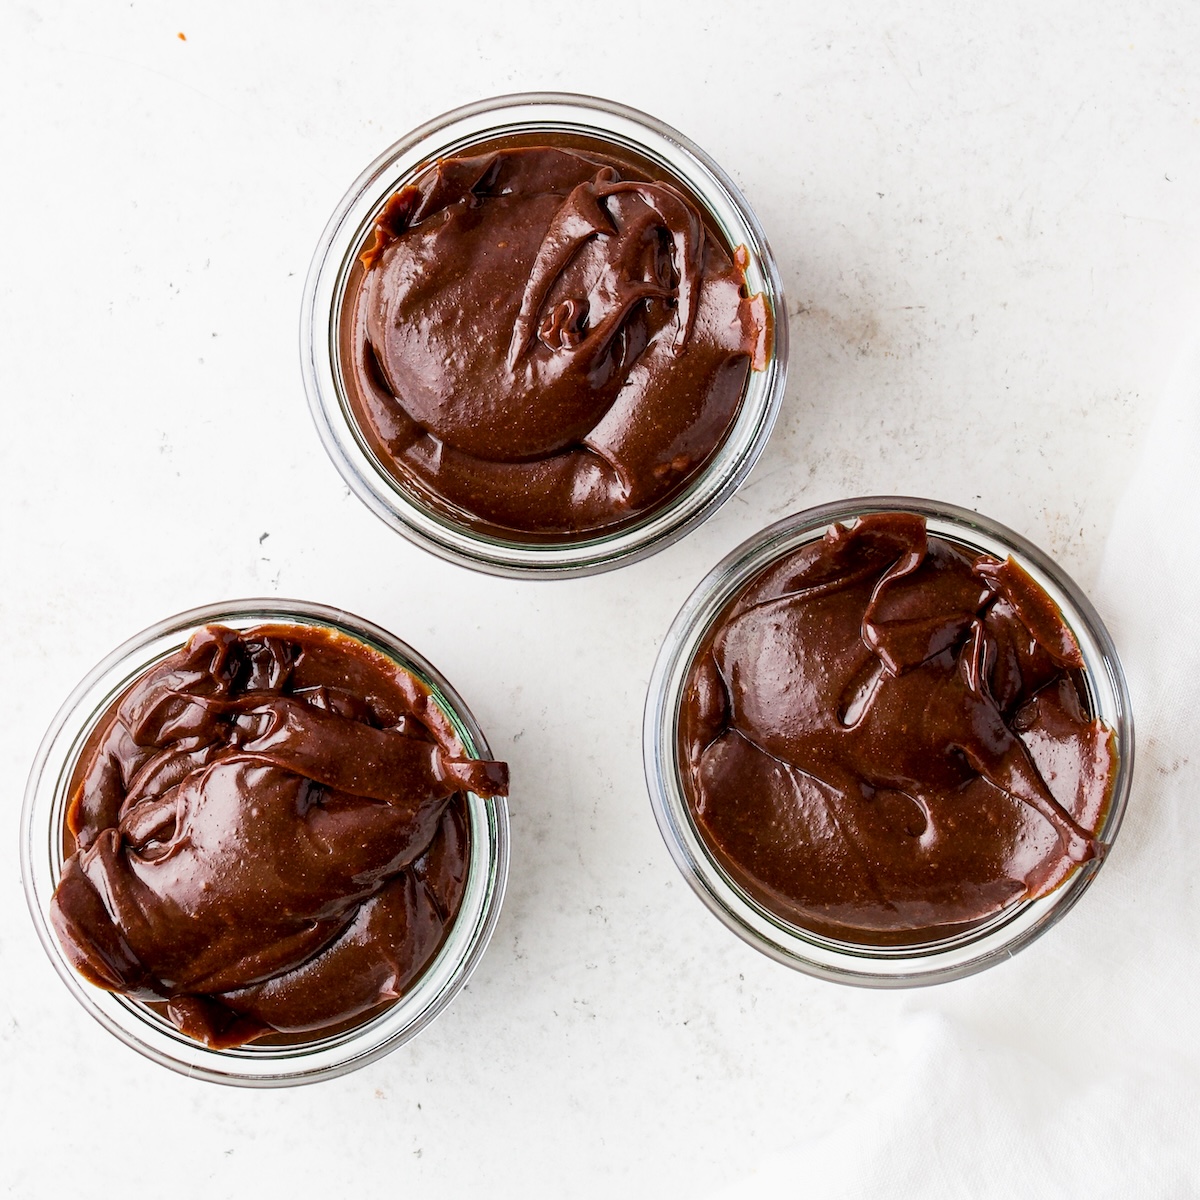 Three glass jars filled with fresh homemade nutella.